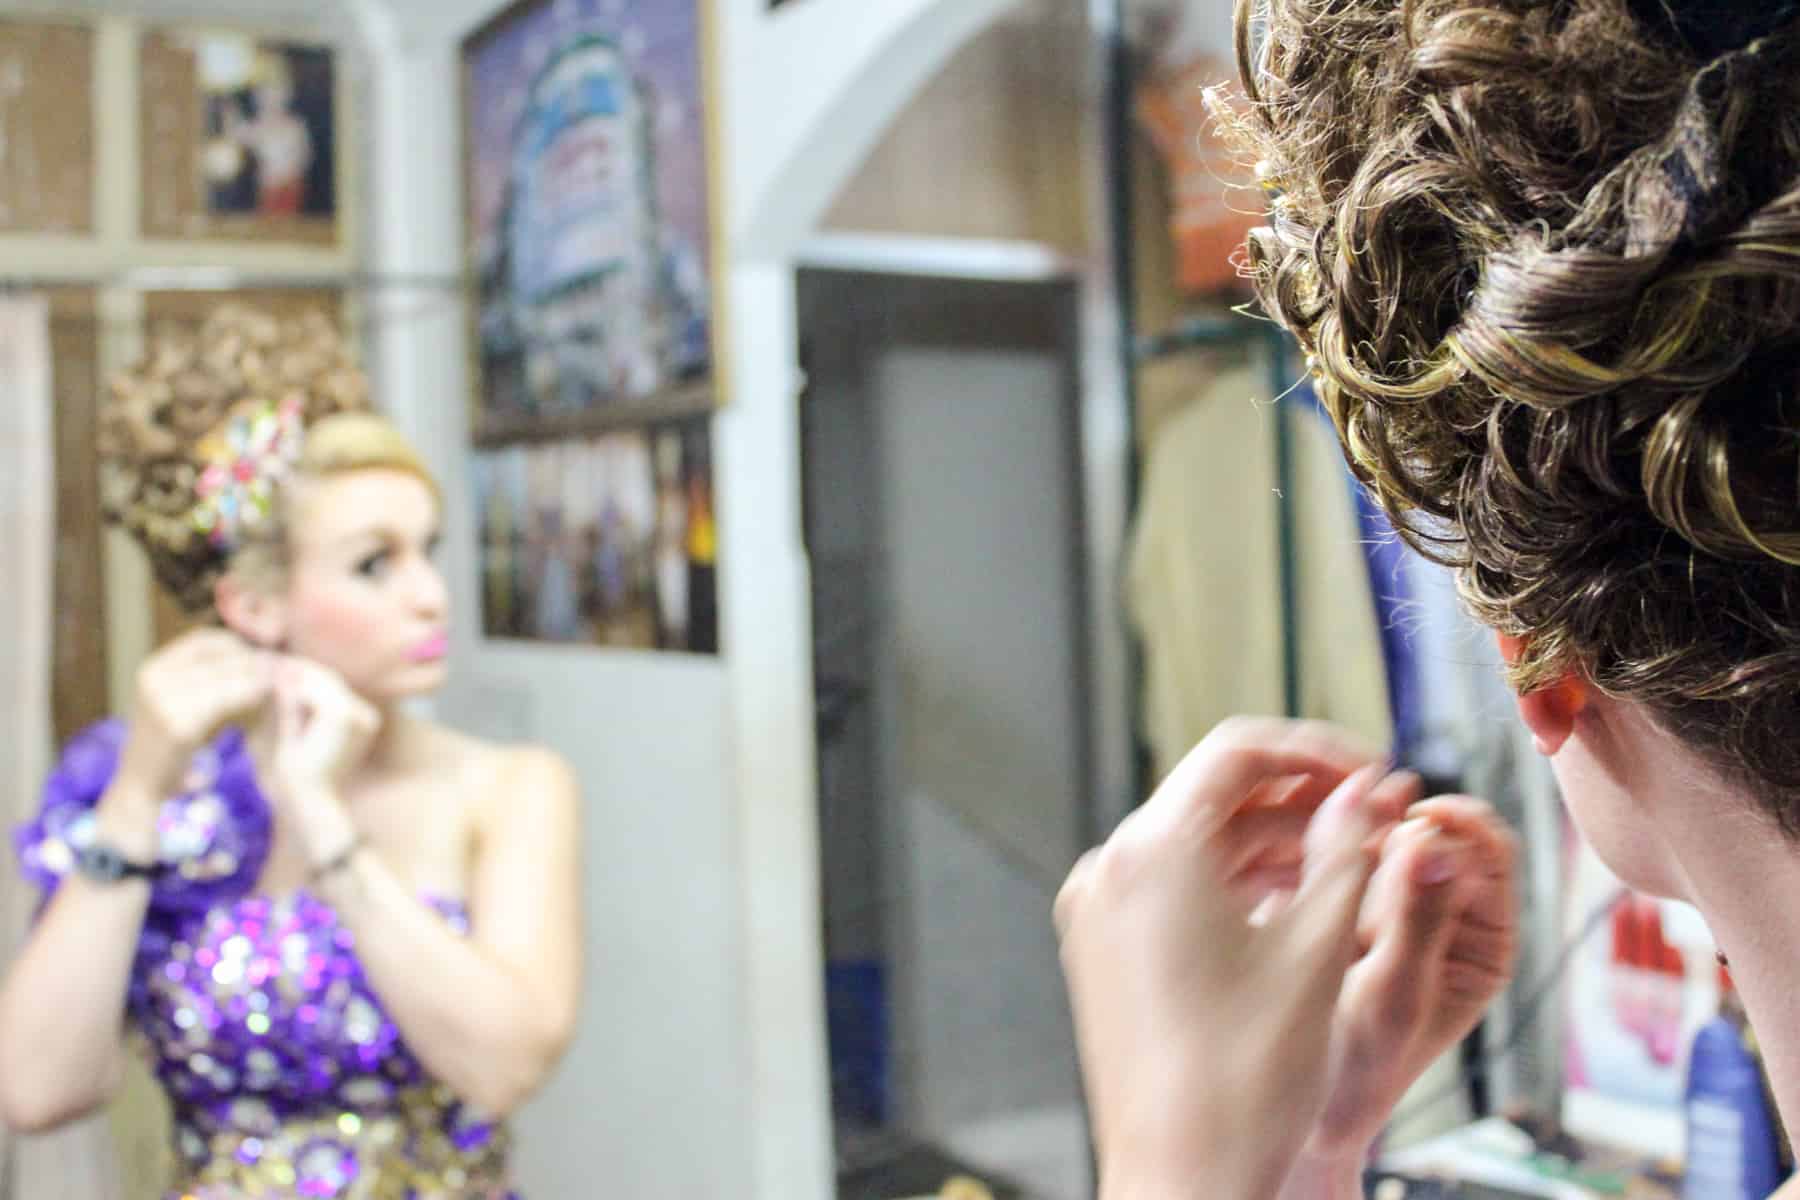 A blonde woman in a purple dress looks into a mirror and applies an earring during a photoshoot in Cambodia.